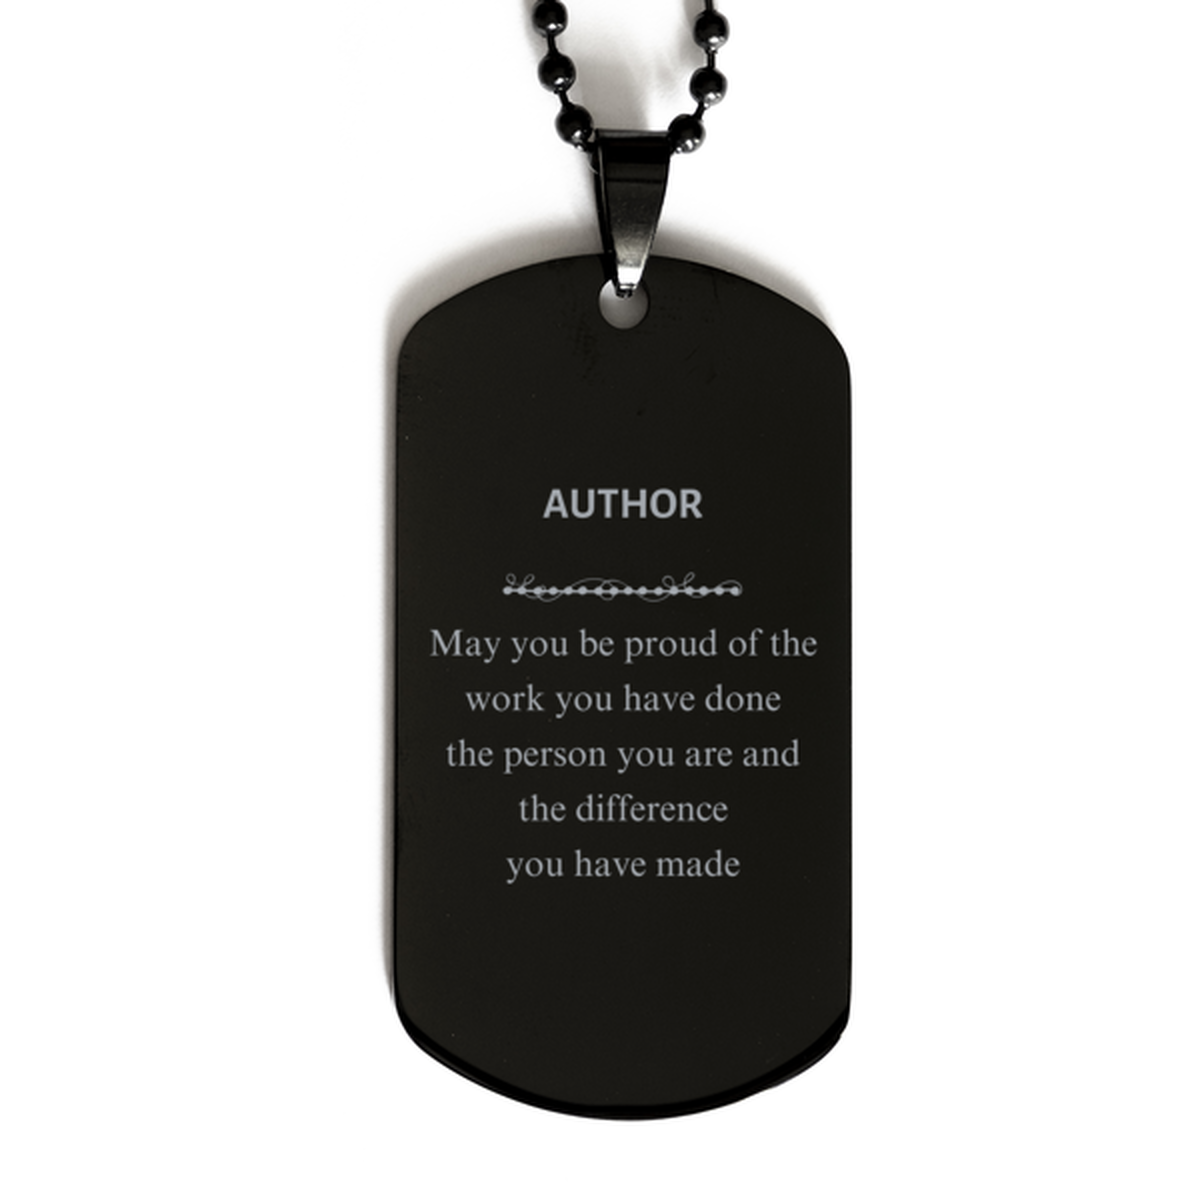 Author May you be proud of the work you have done, Retirement Author Black Dog Tag for Colleague Appreciation Gifts Amazing for Author